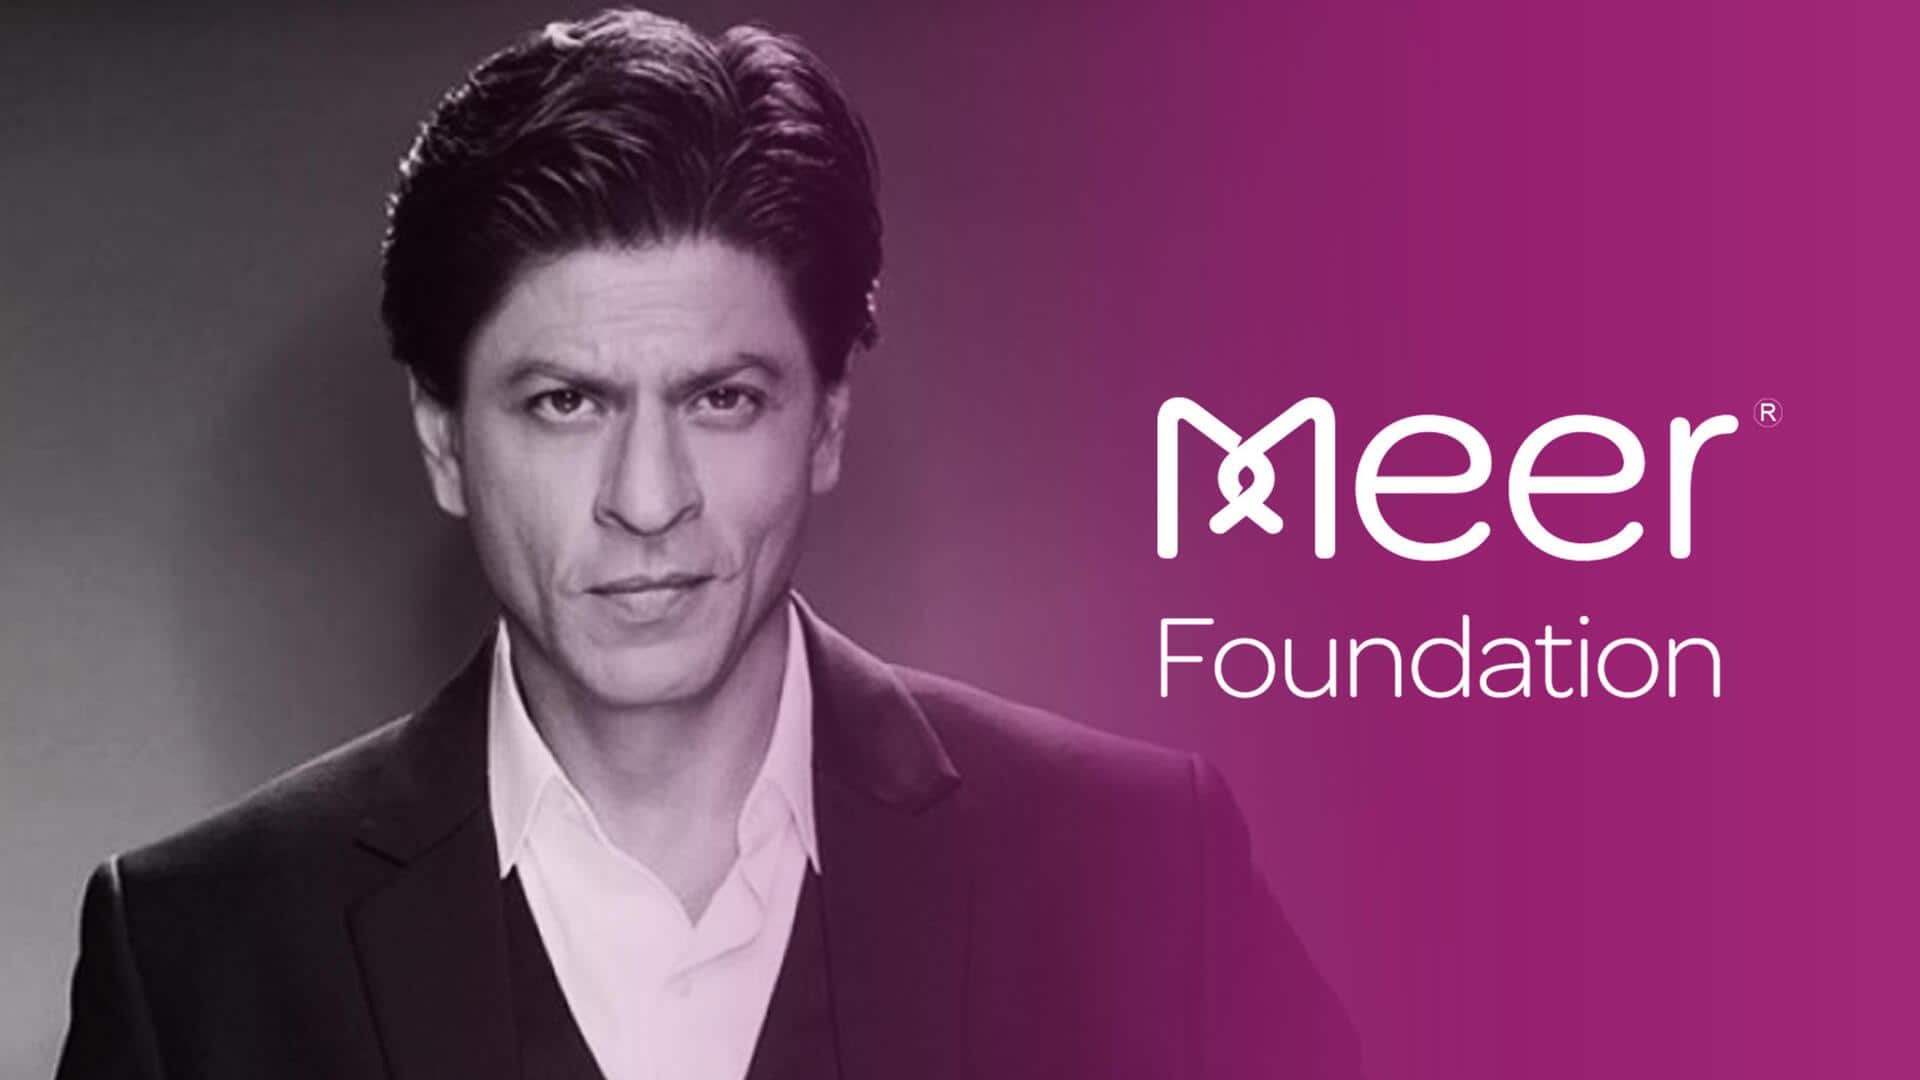 Shah Rukh Khan's Meer Foundation receives license for foreign funding